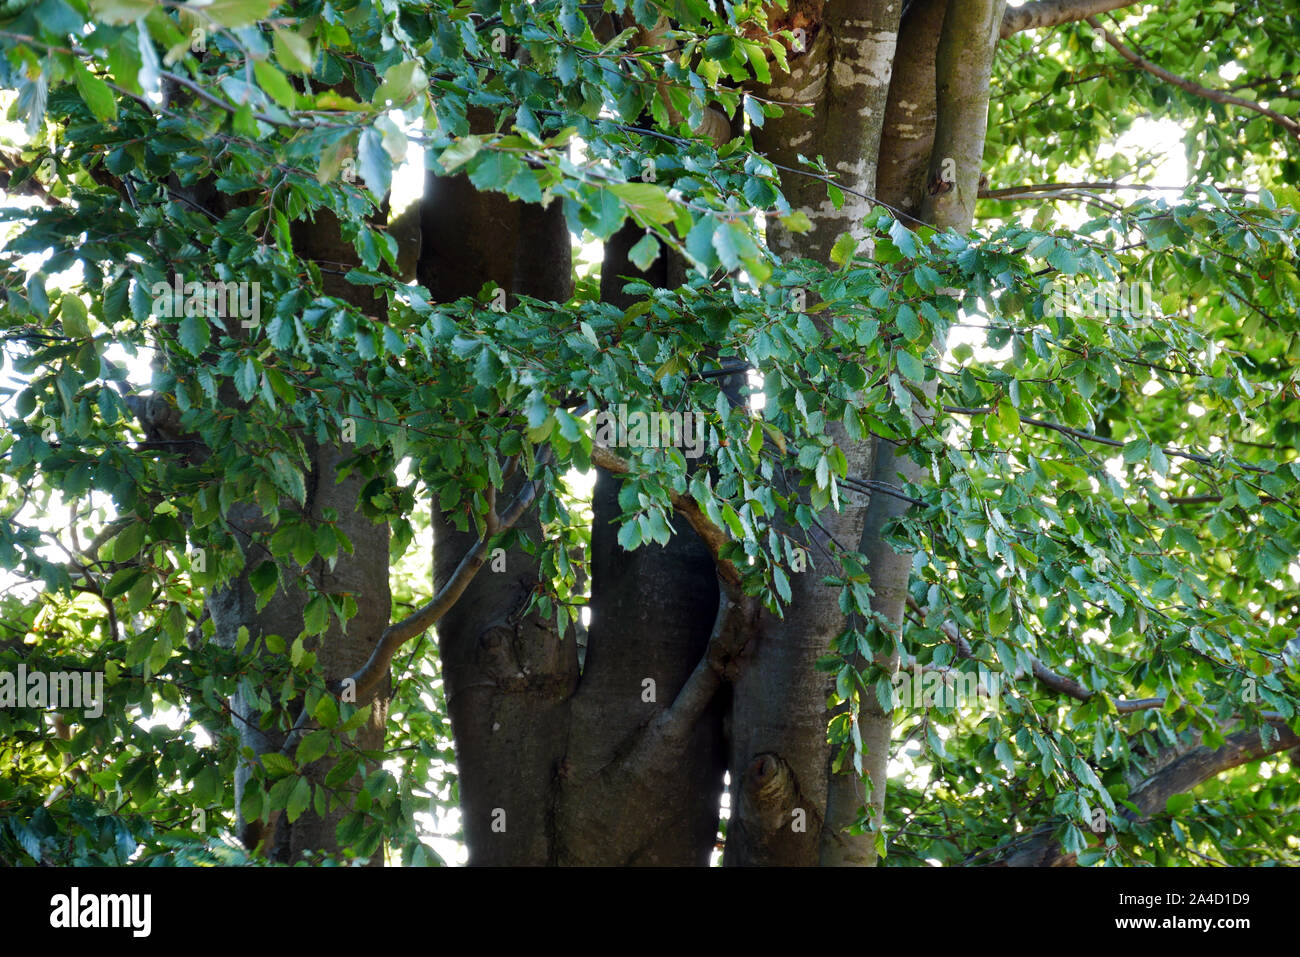 Young twigs with green leaves on a large beech tree. Close-up of the tree crown. Stock Photo